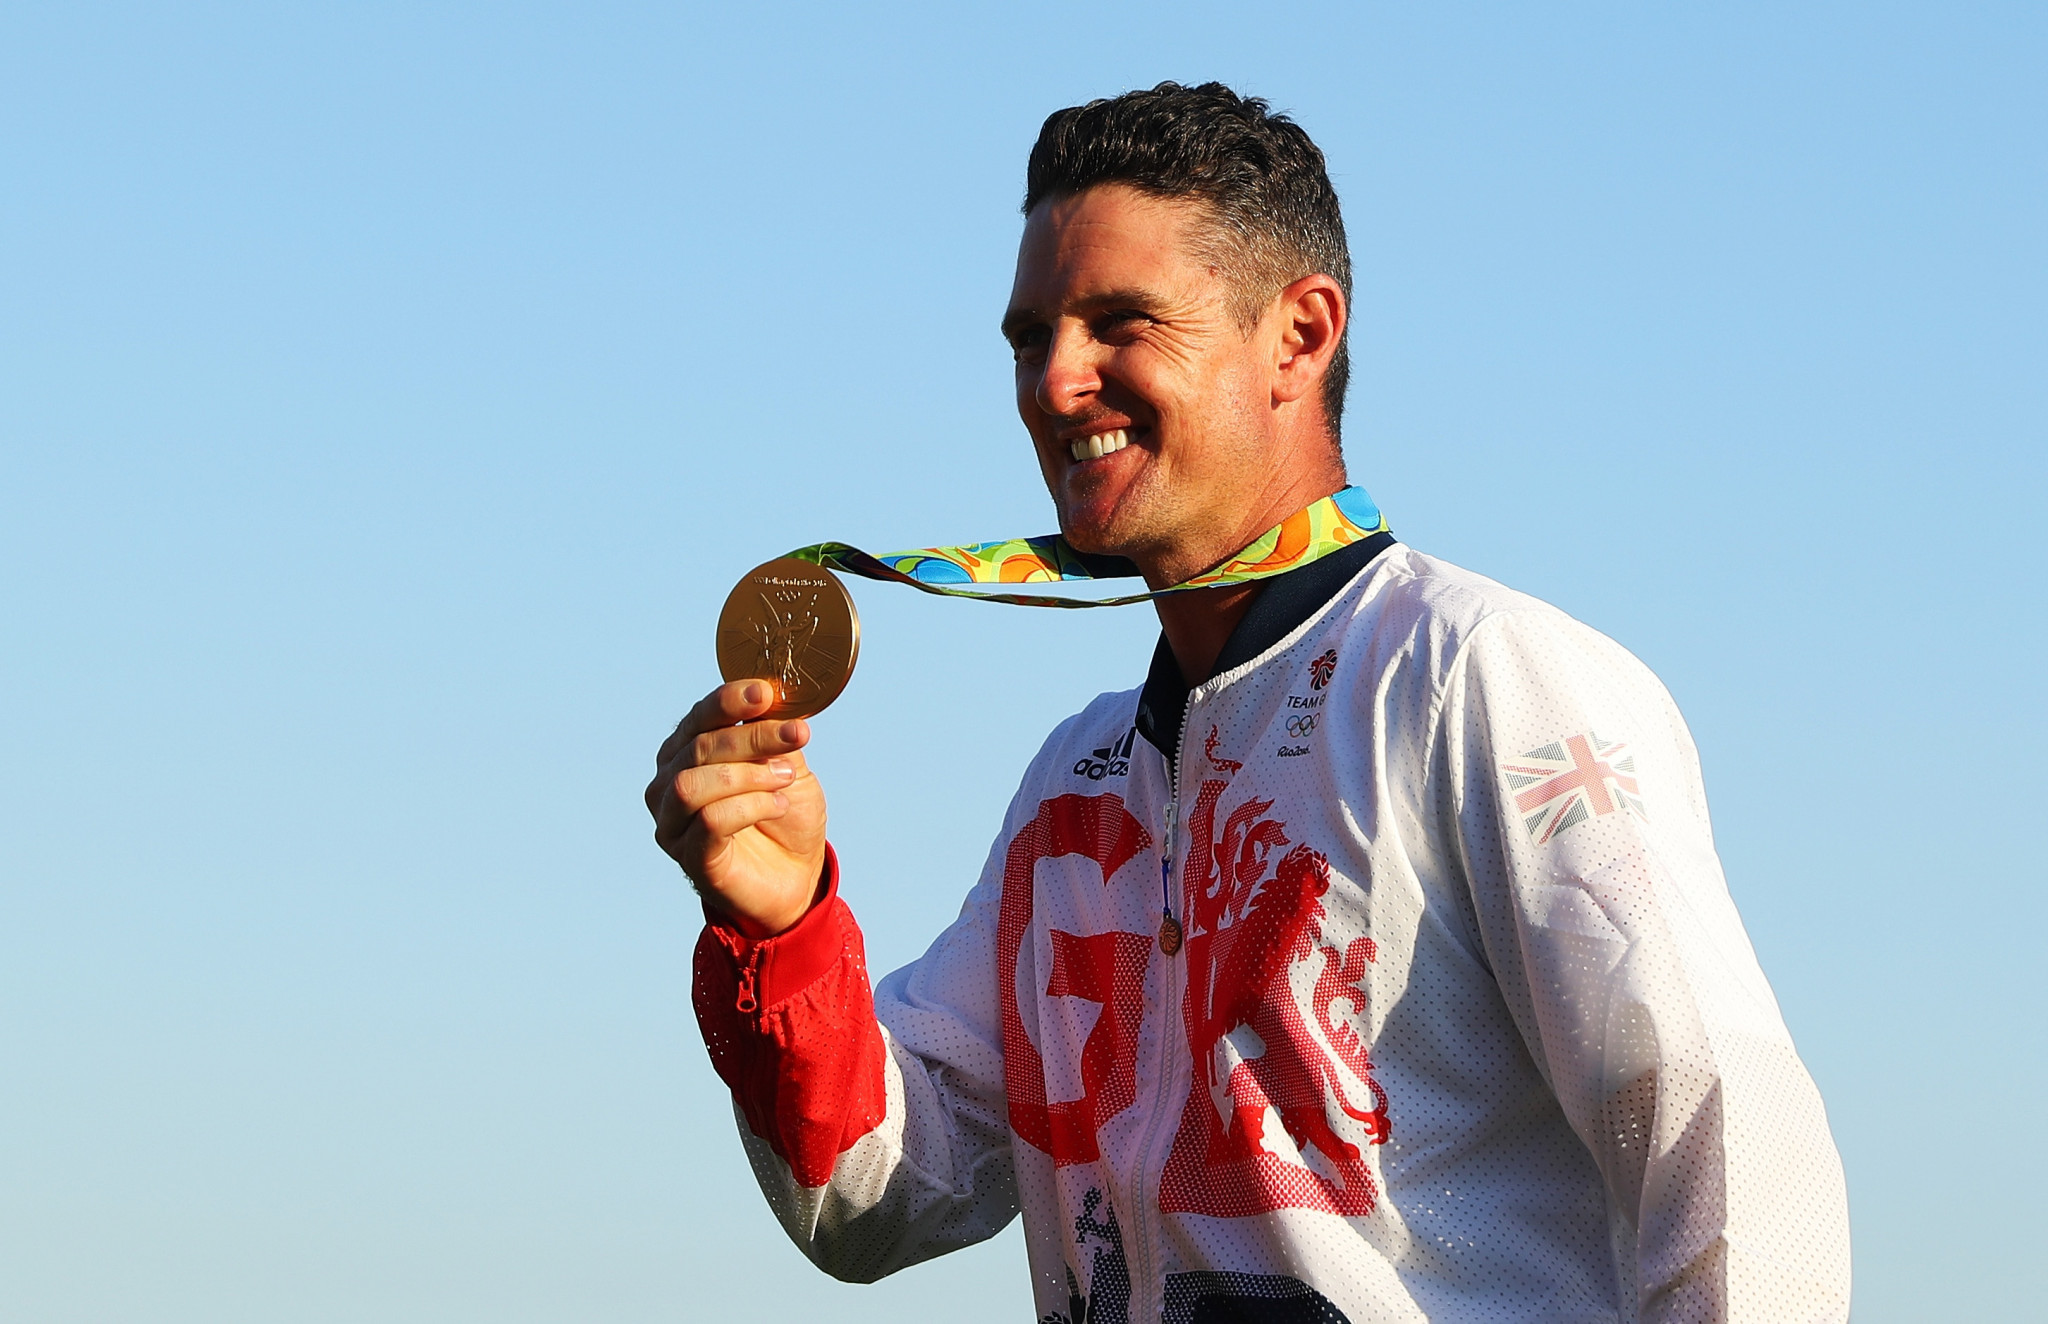 Justin Rose won the Olympic title at Rio 2016 as golf returned for the first time in 112 years ©Getty Images